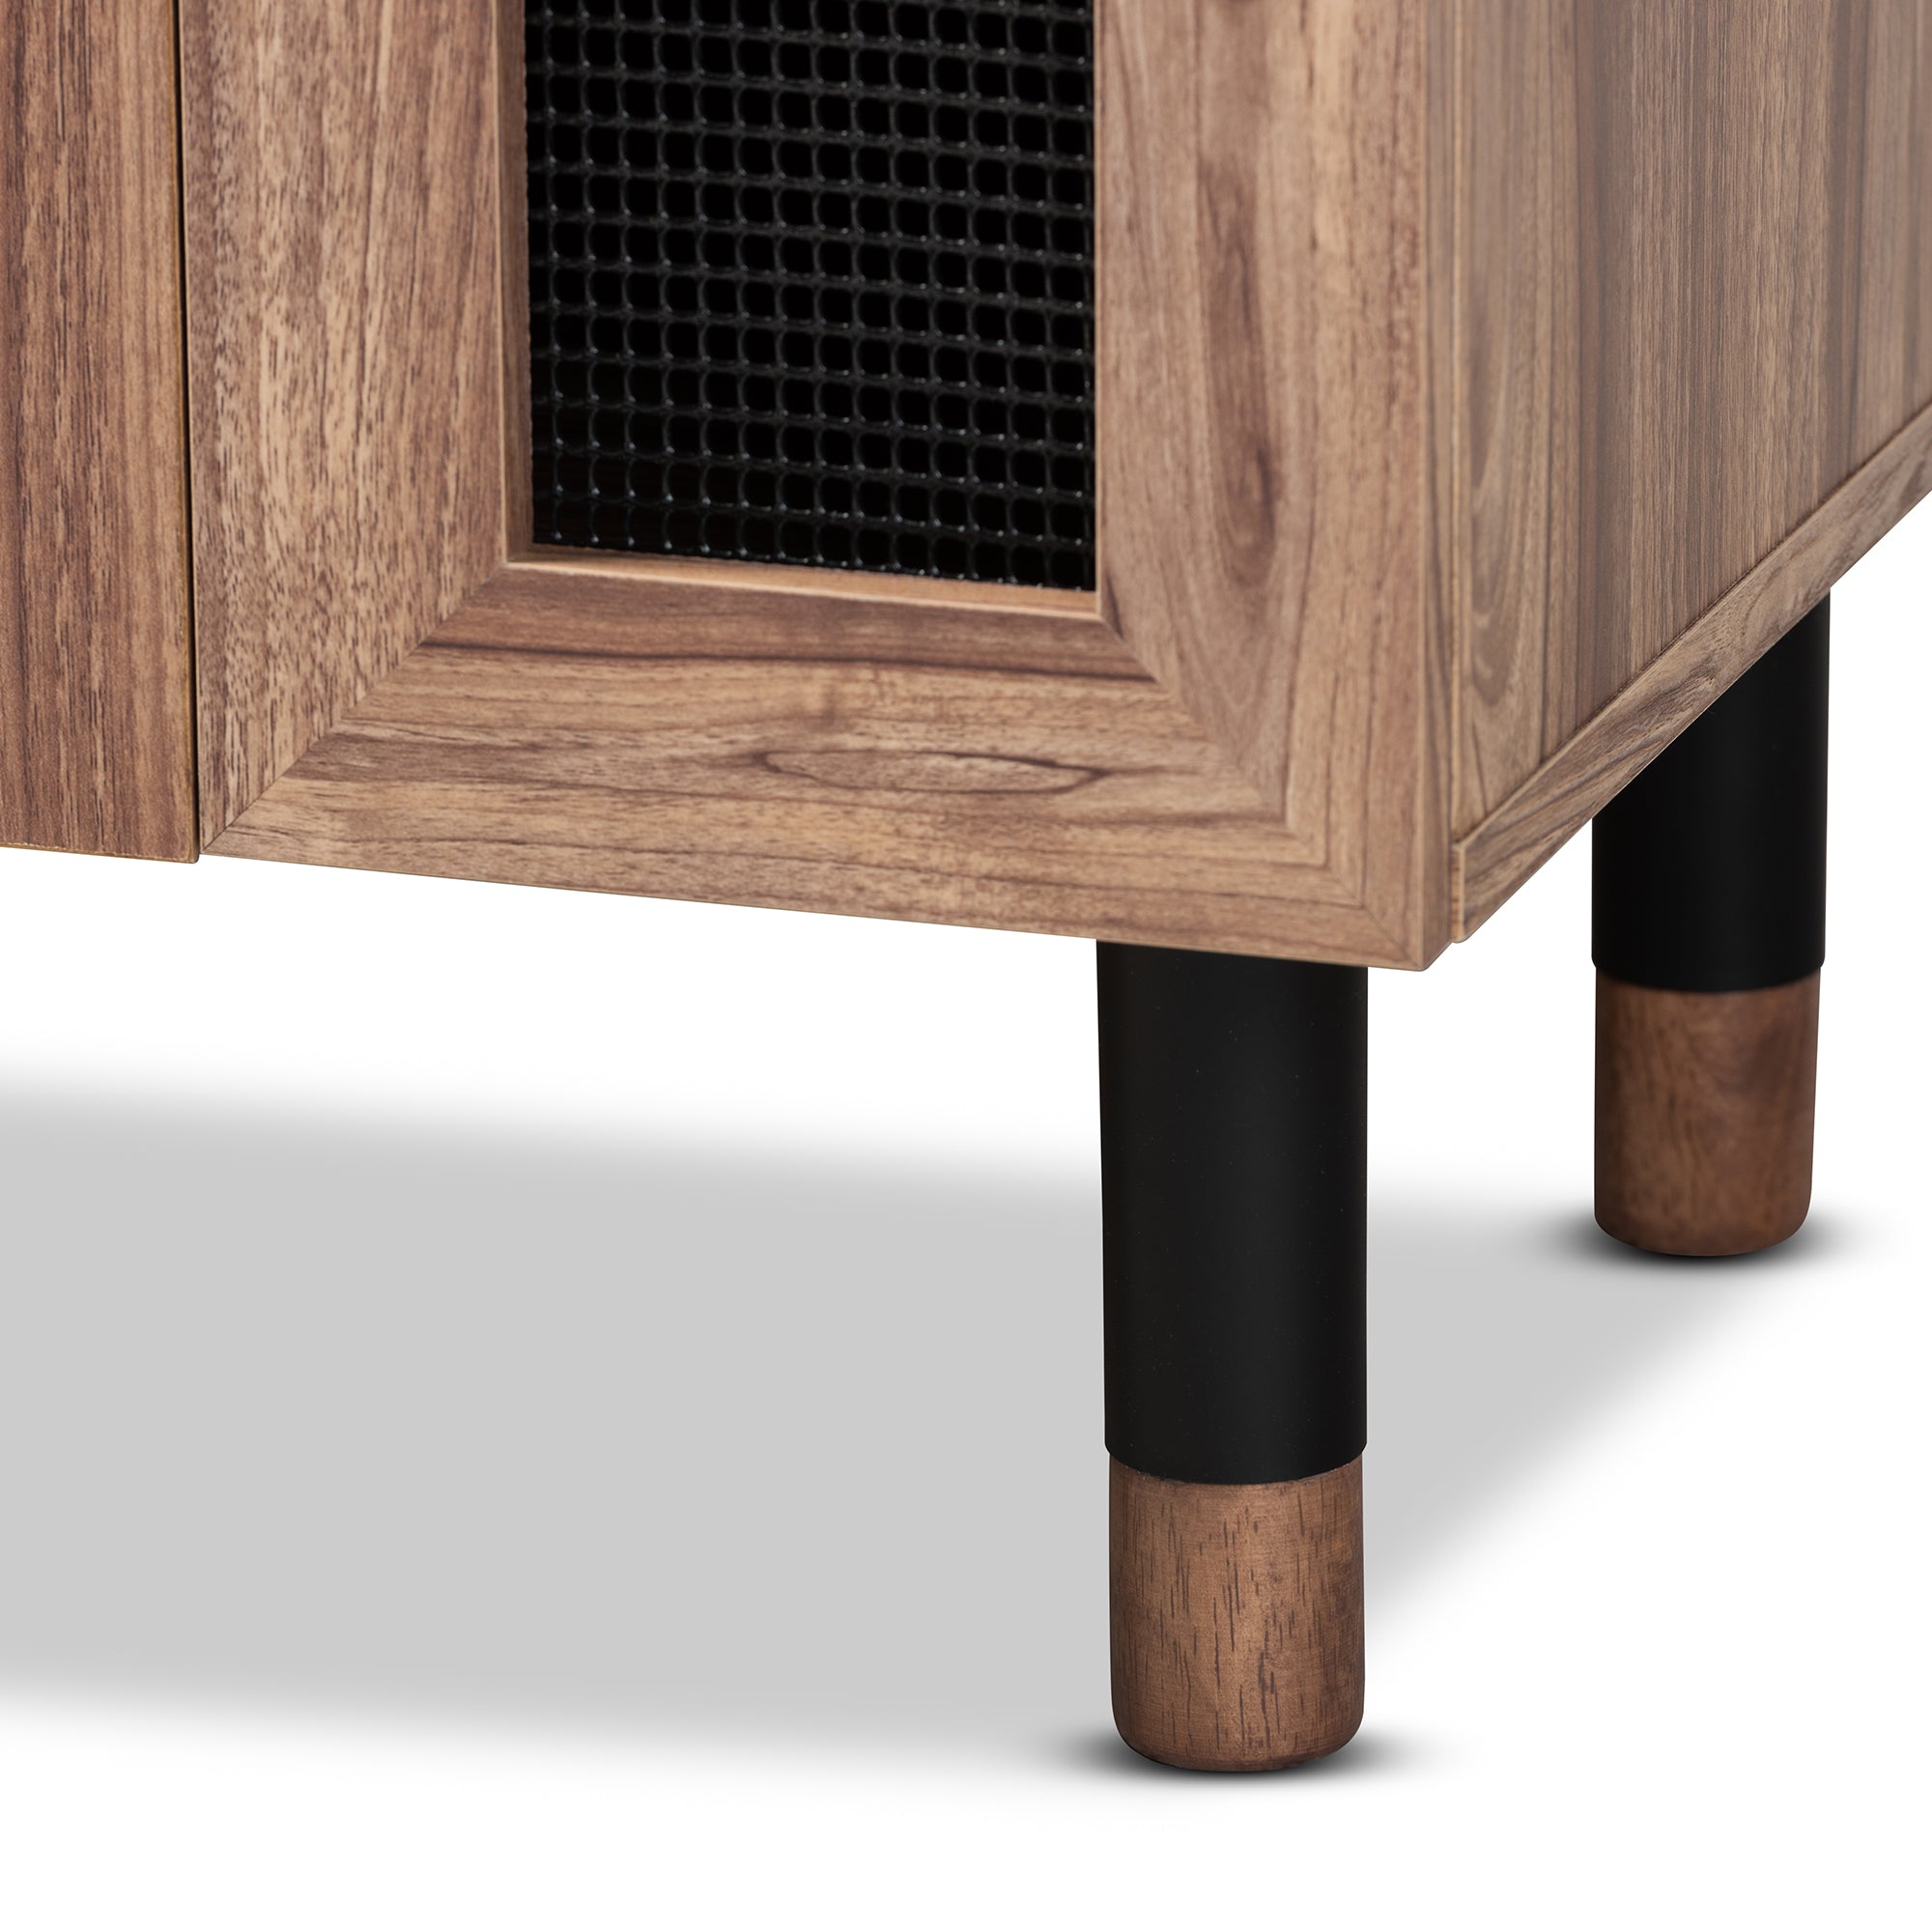 Valina Contemporary Shoe Cabinet 2-Door with Screen Inserts-Shoe Cabinet-Baxton Studio - WI-Wall2Wall Furnishings